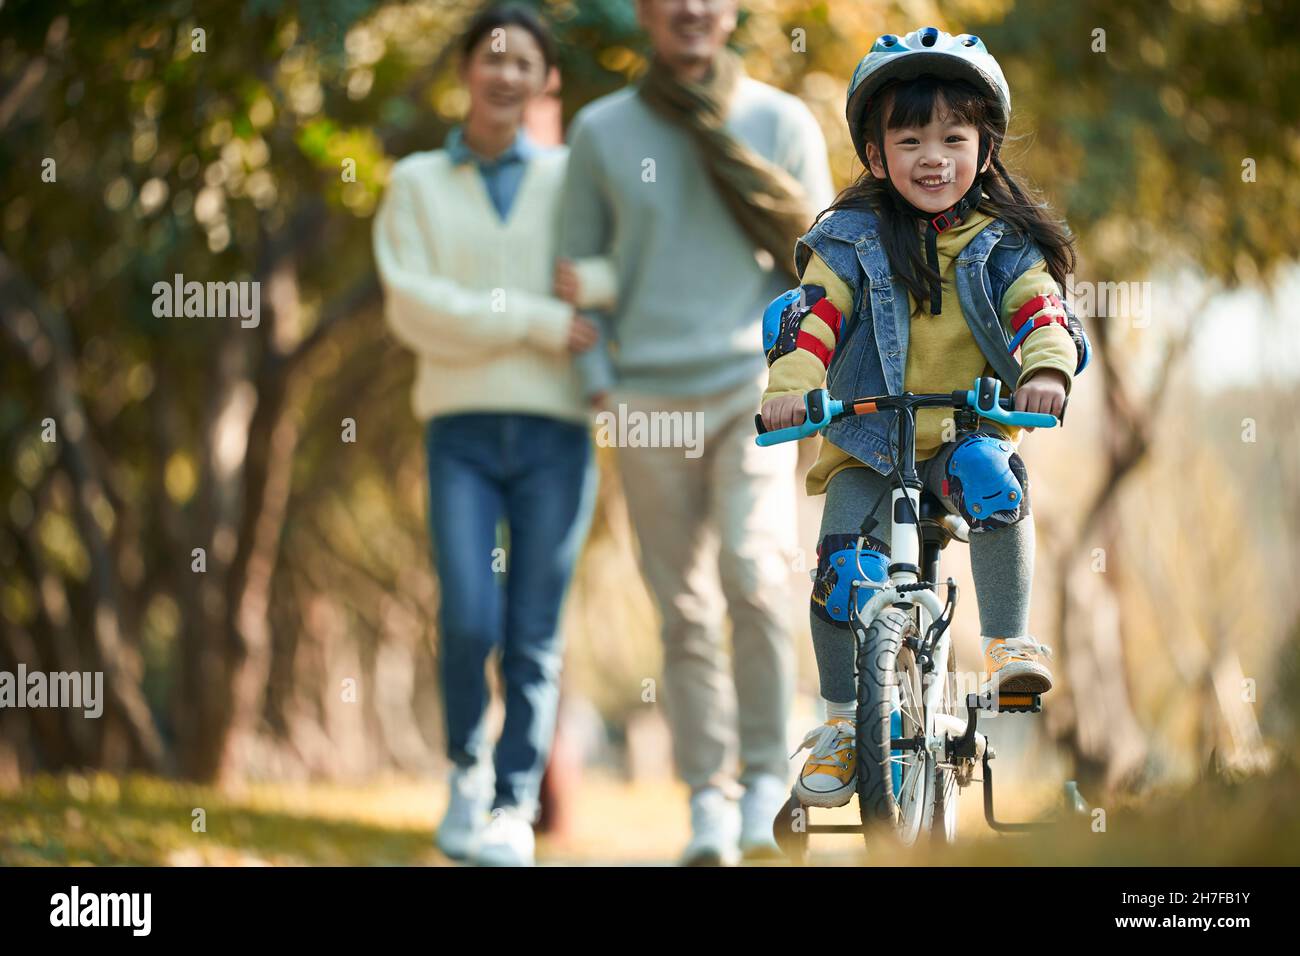 little asian girl with helmet and full protection gears riding bike in city park with parents watching from behind Stock Photo